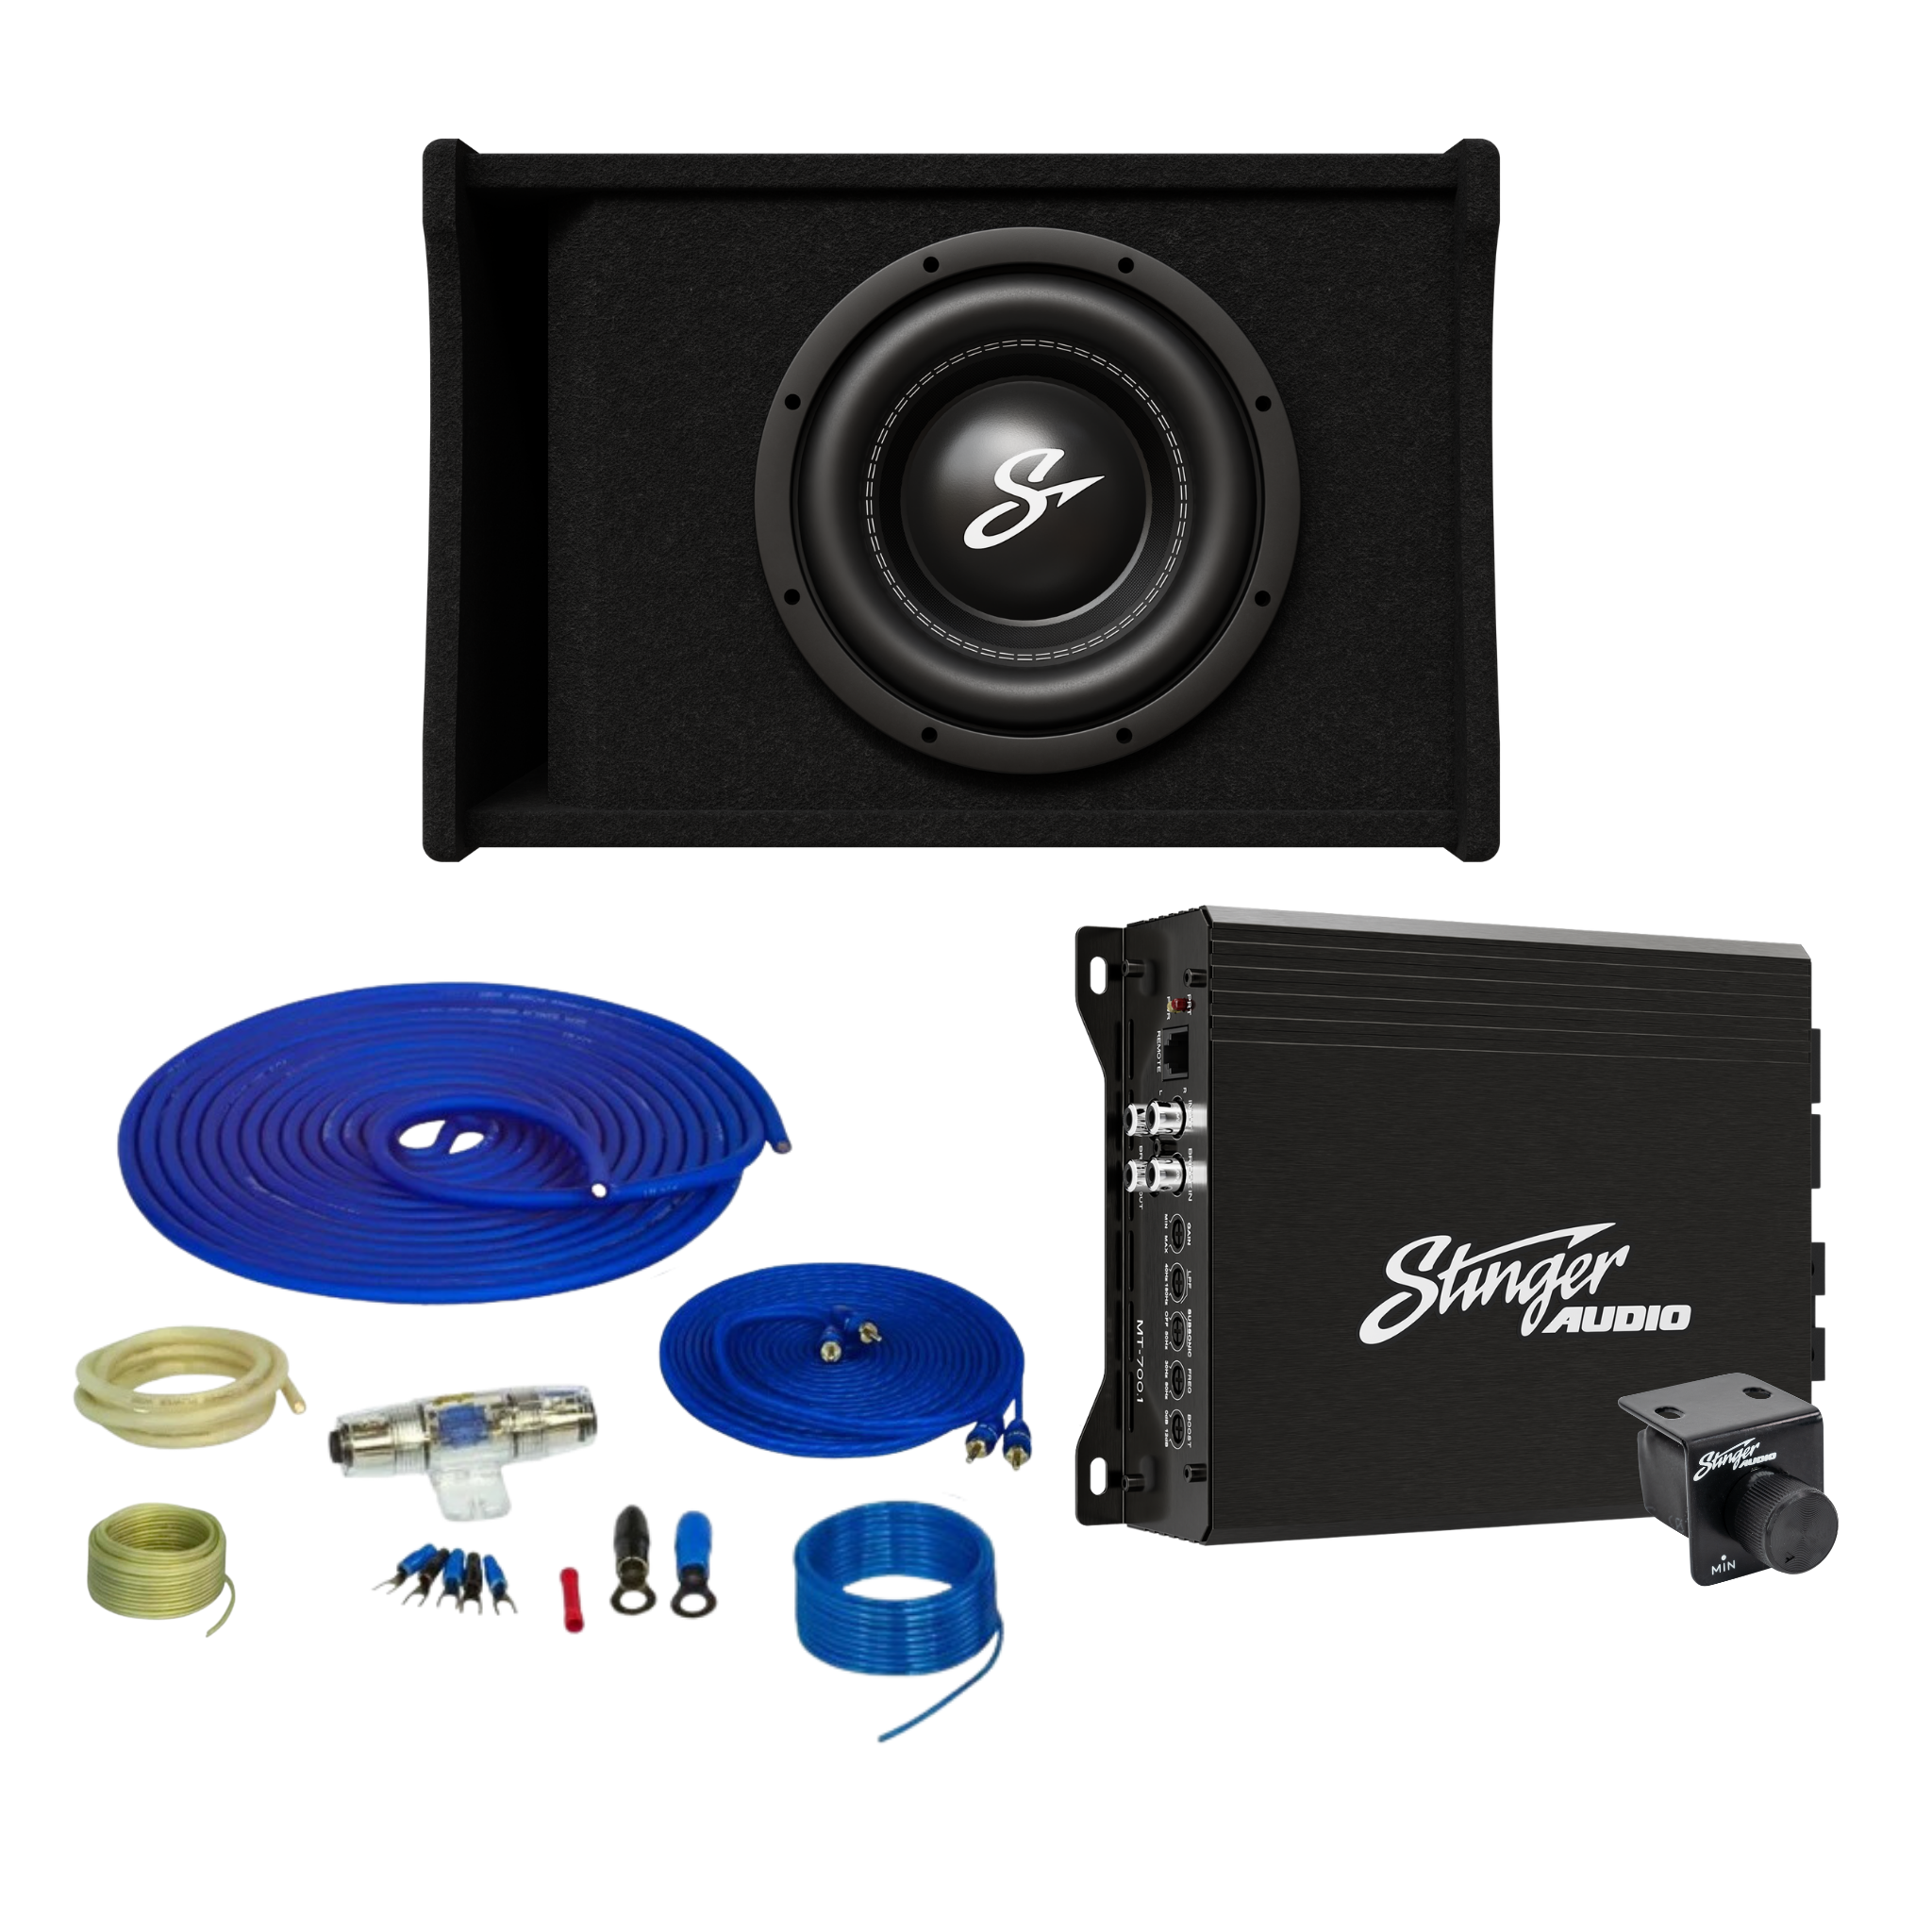 Stinger Off-Road Single 12" 700 Watt (RMS) Loaded Ported Subwoofer Enclosure (700 Watts RMS/1,200 Watts Max) Bass Package with Amplifier & Complete Wiring Kit